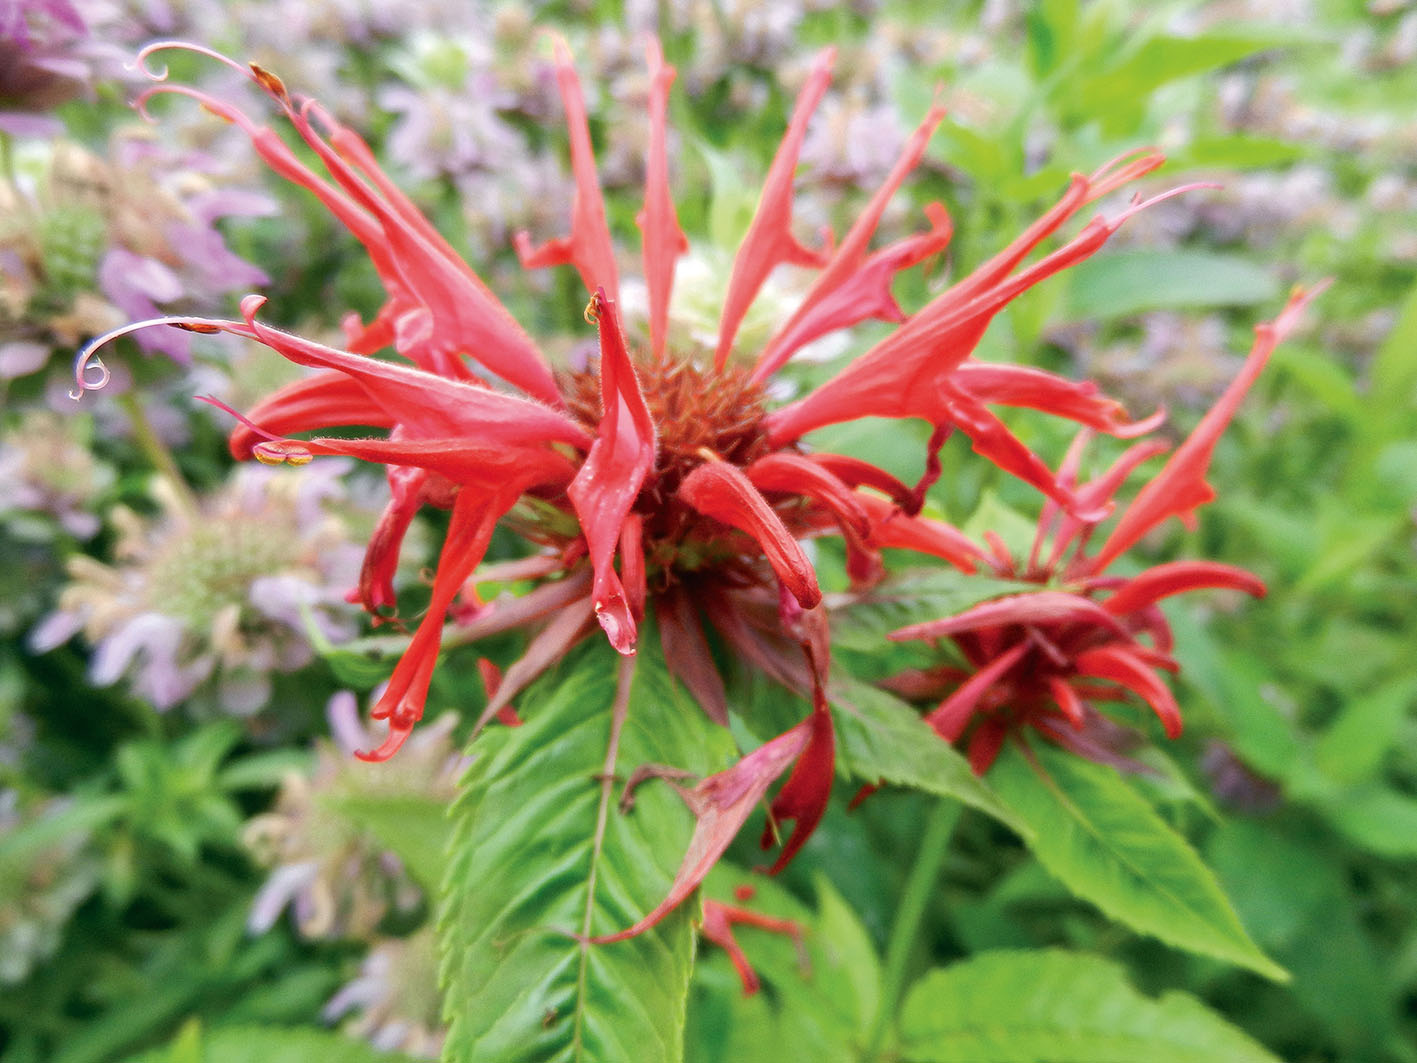 Agronomic and organoleptic comparisons of different lines of monarde (Monarda didyma)